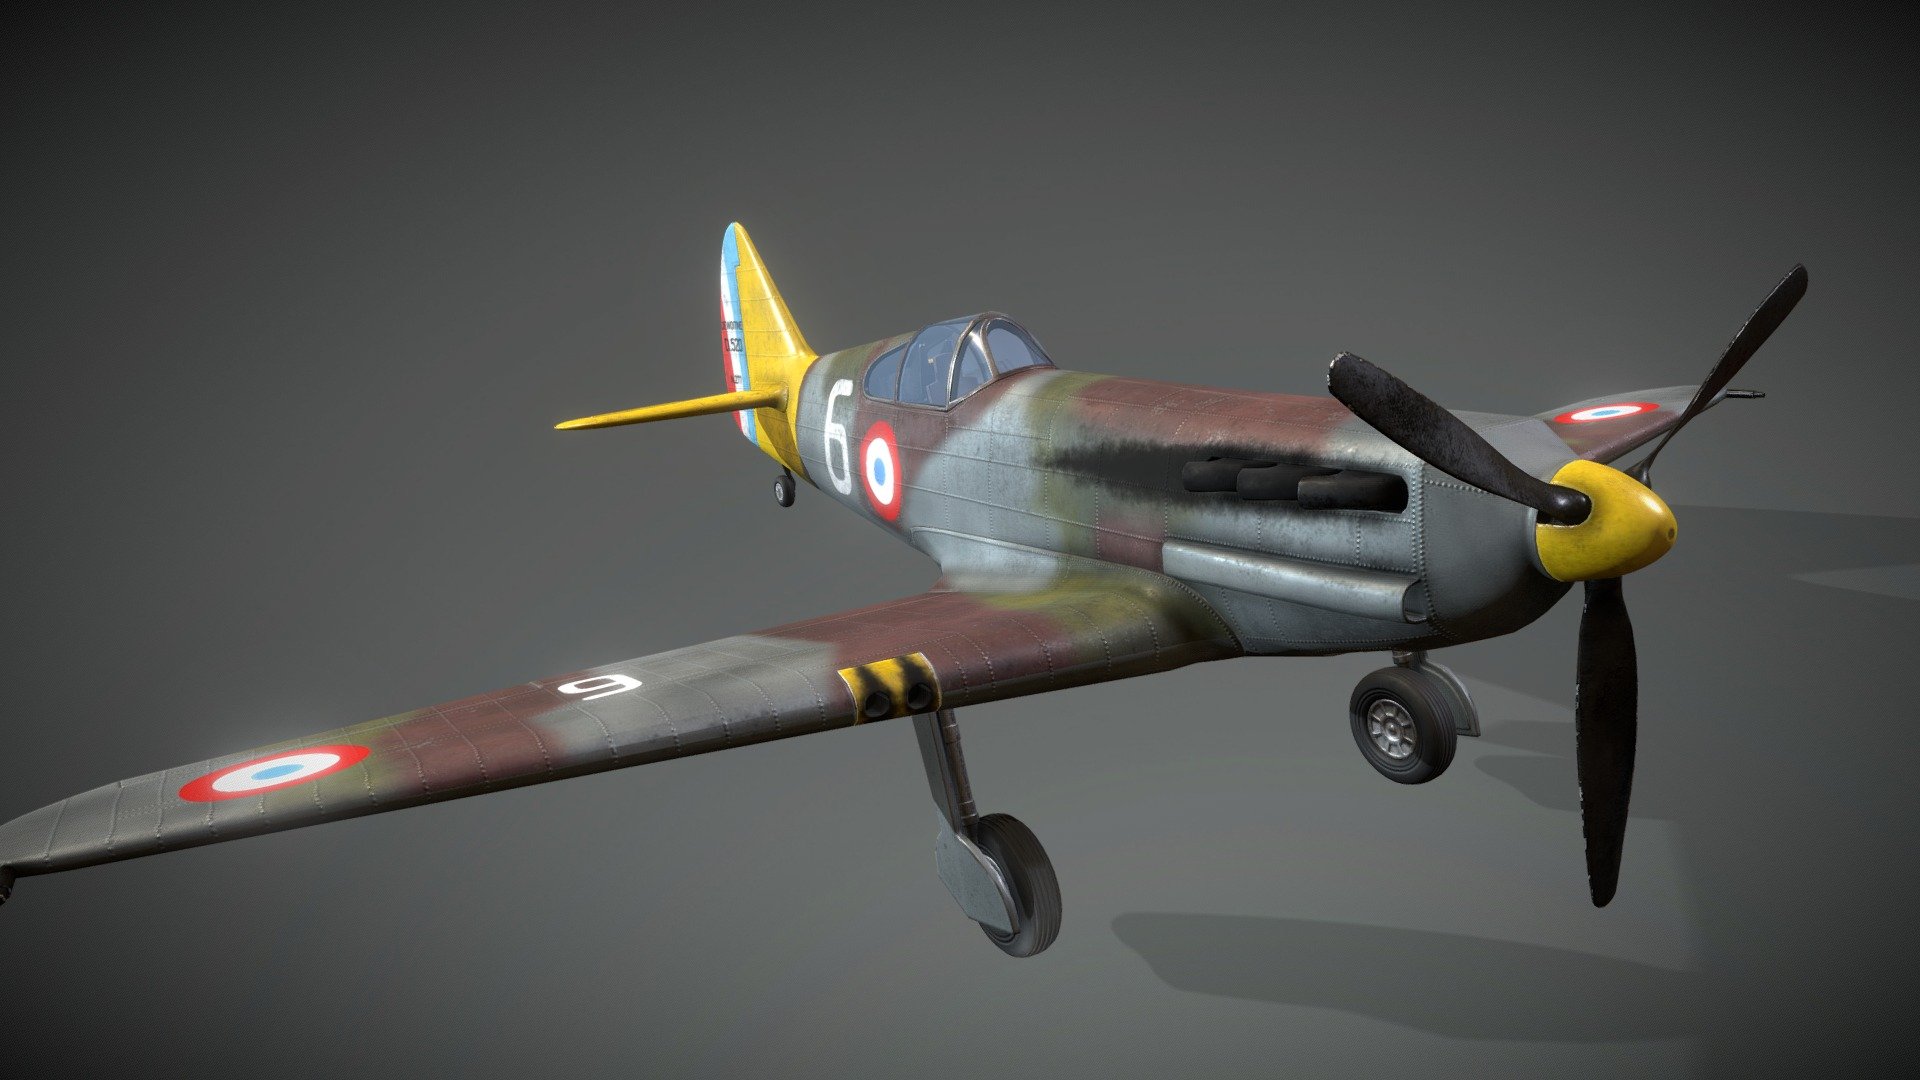 Escape Germany - Dewoitine D.520

3D Model for Escape Germany (PC-Game) 

Fully rigged an animated ingame. Flight Example BF109: https://www.youtube.com/watch?v=jb6zUBnfUZE&amp;t=8s

Model + Textures by: David Falke

Rigged + Animations by: Spaehling

Website: https://www.grip420.com/

Discord: Follow us on Discord

Facebook Follow us on Facebook

Game  Escape Germany - Escape Germany - Dewoitine D.520 - 3D model by GRIP420 3d model